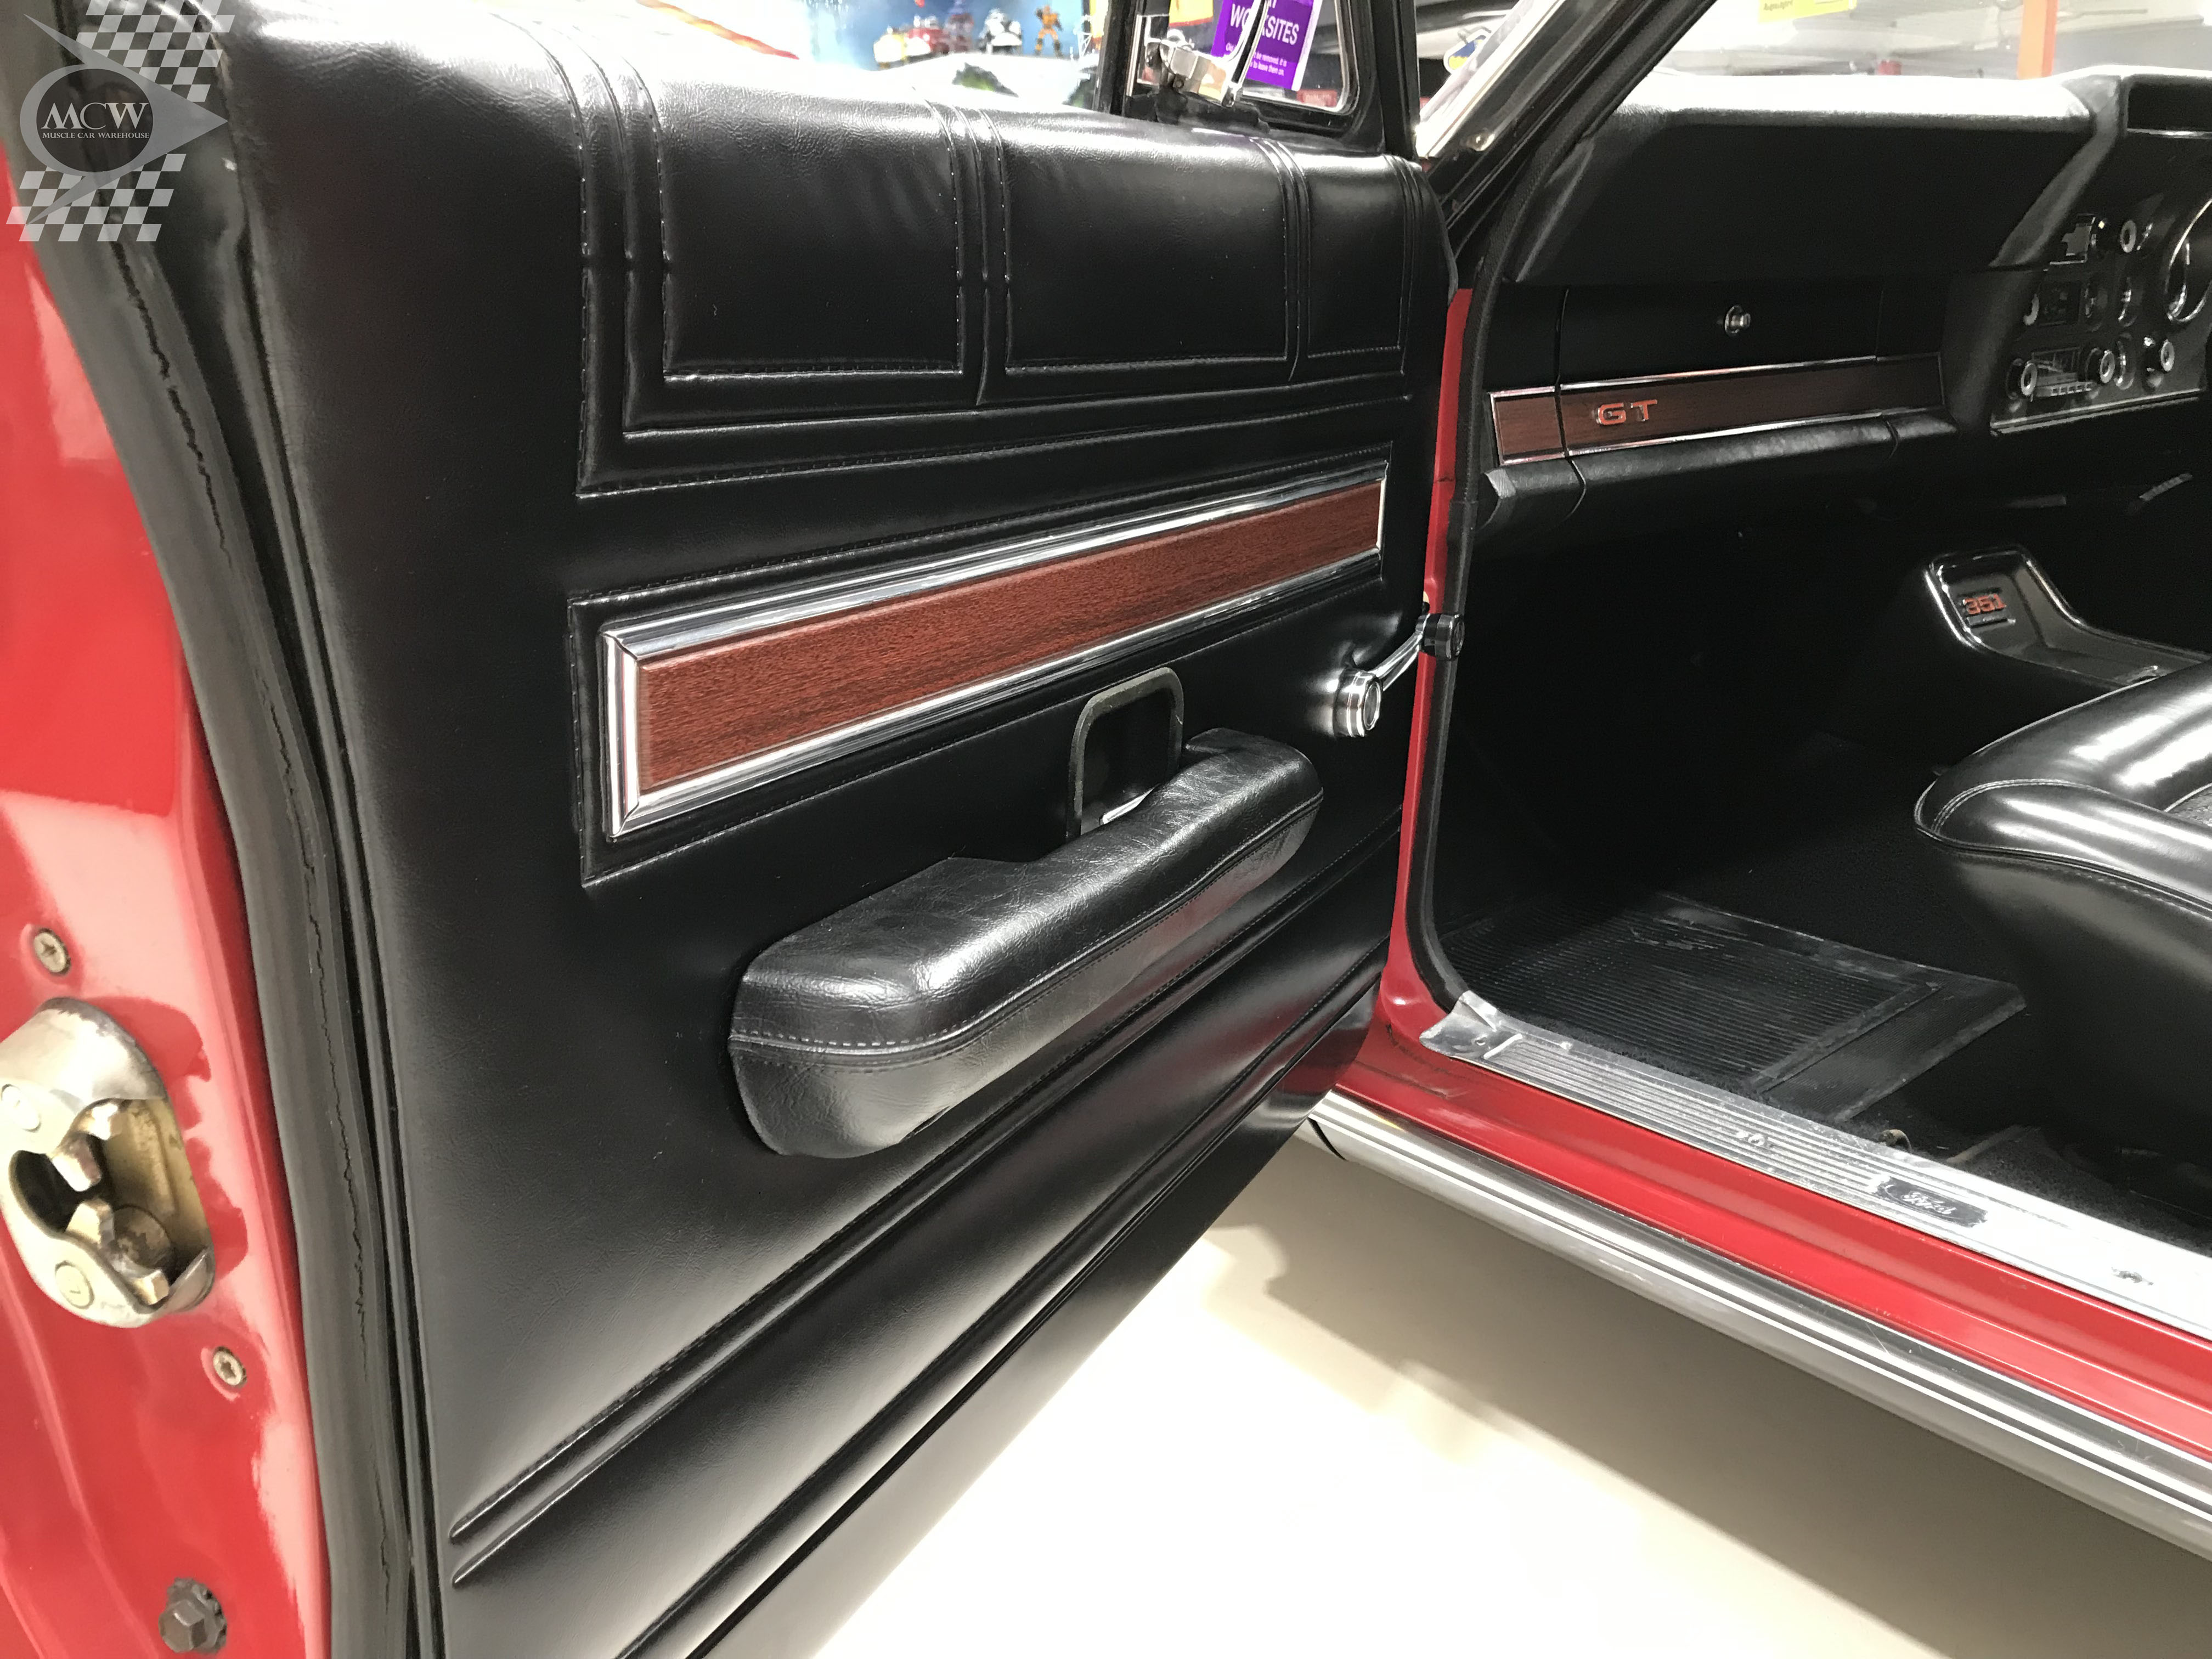 Ford Falcon XW GT Candy Apple Red Interior | Muscle Car Warehouse